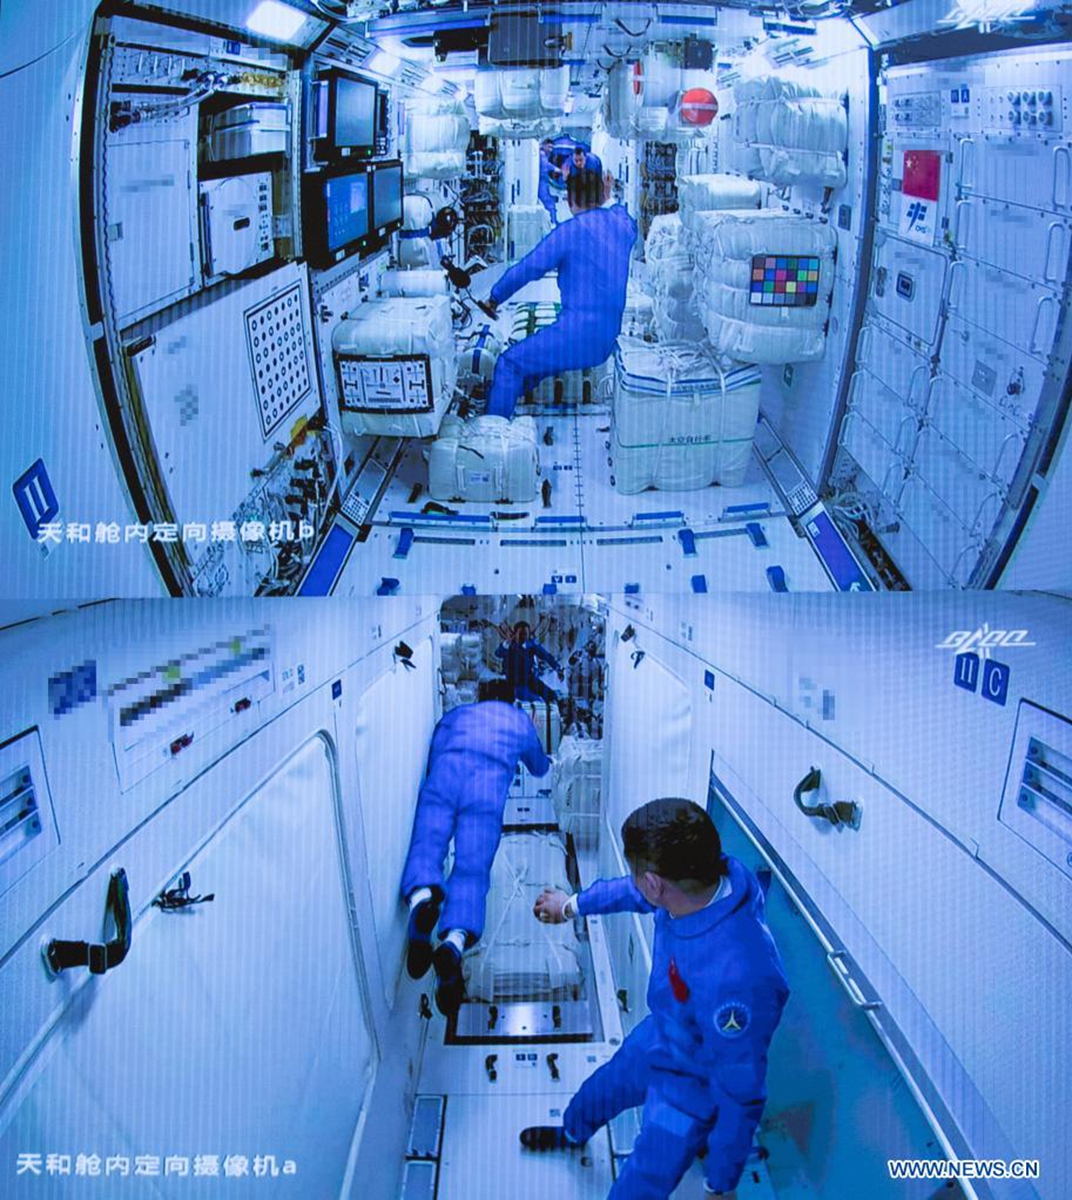 Setting up Wi-Fi, unboxing deliveries – Taikonauts busy 'housewarming' on their 1st day in space - Global Times